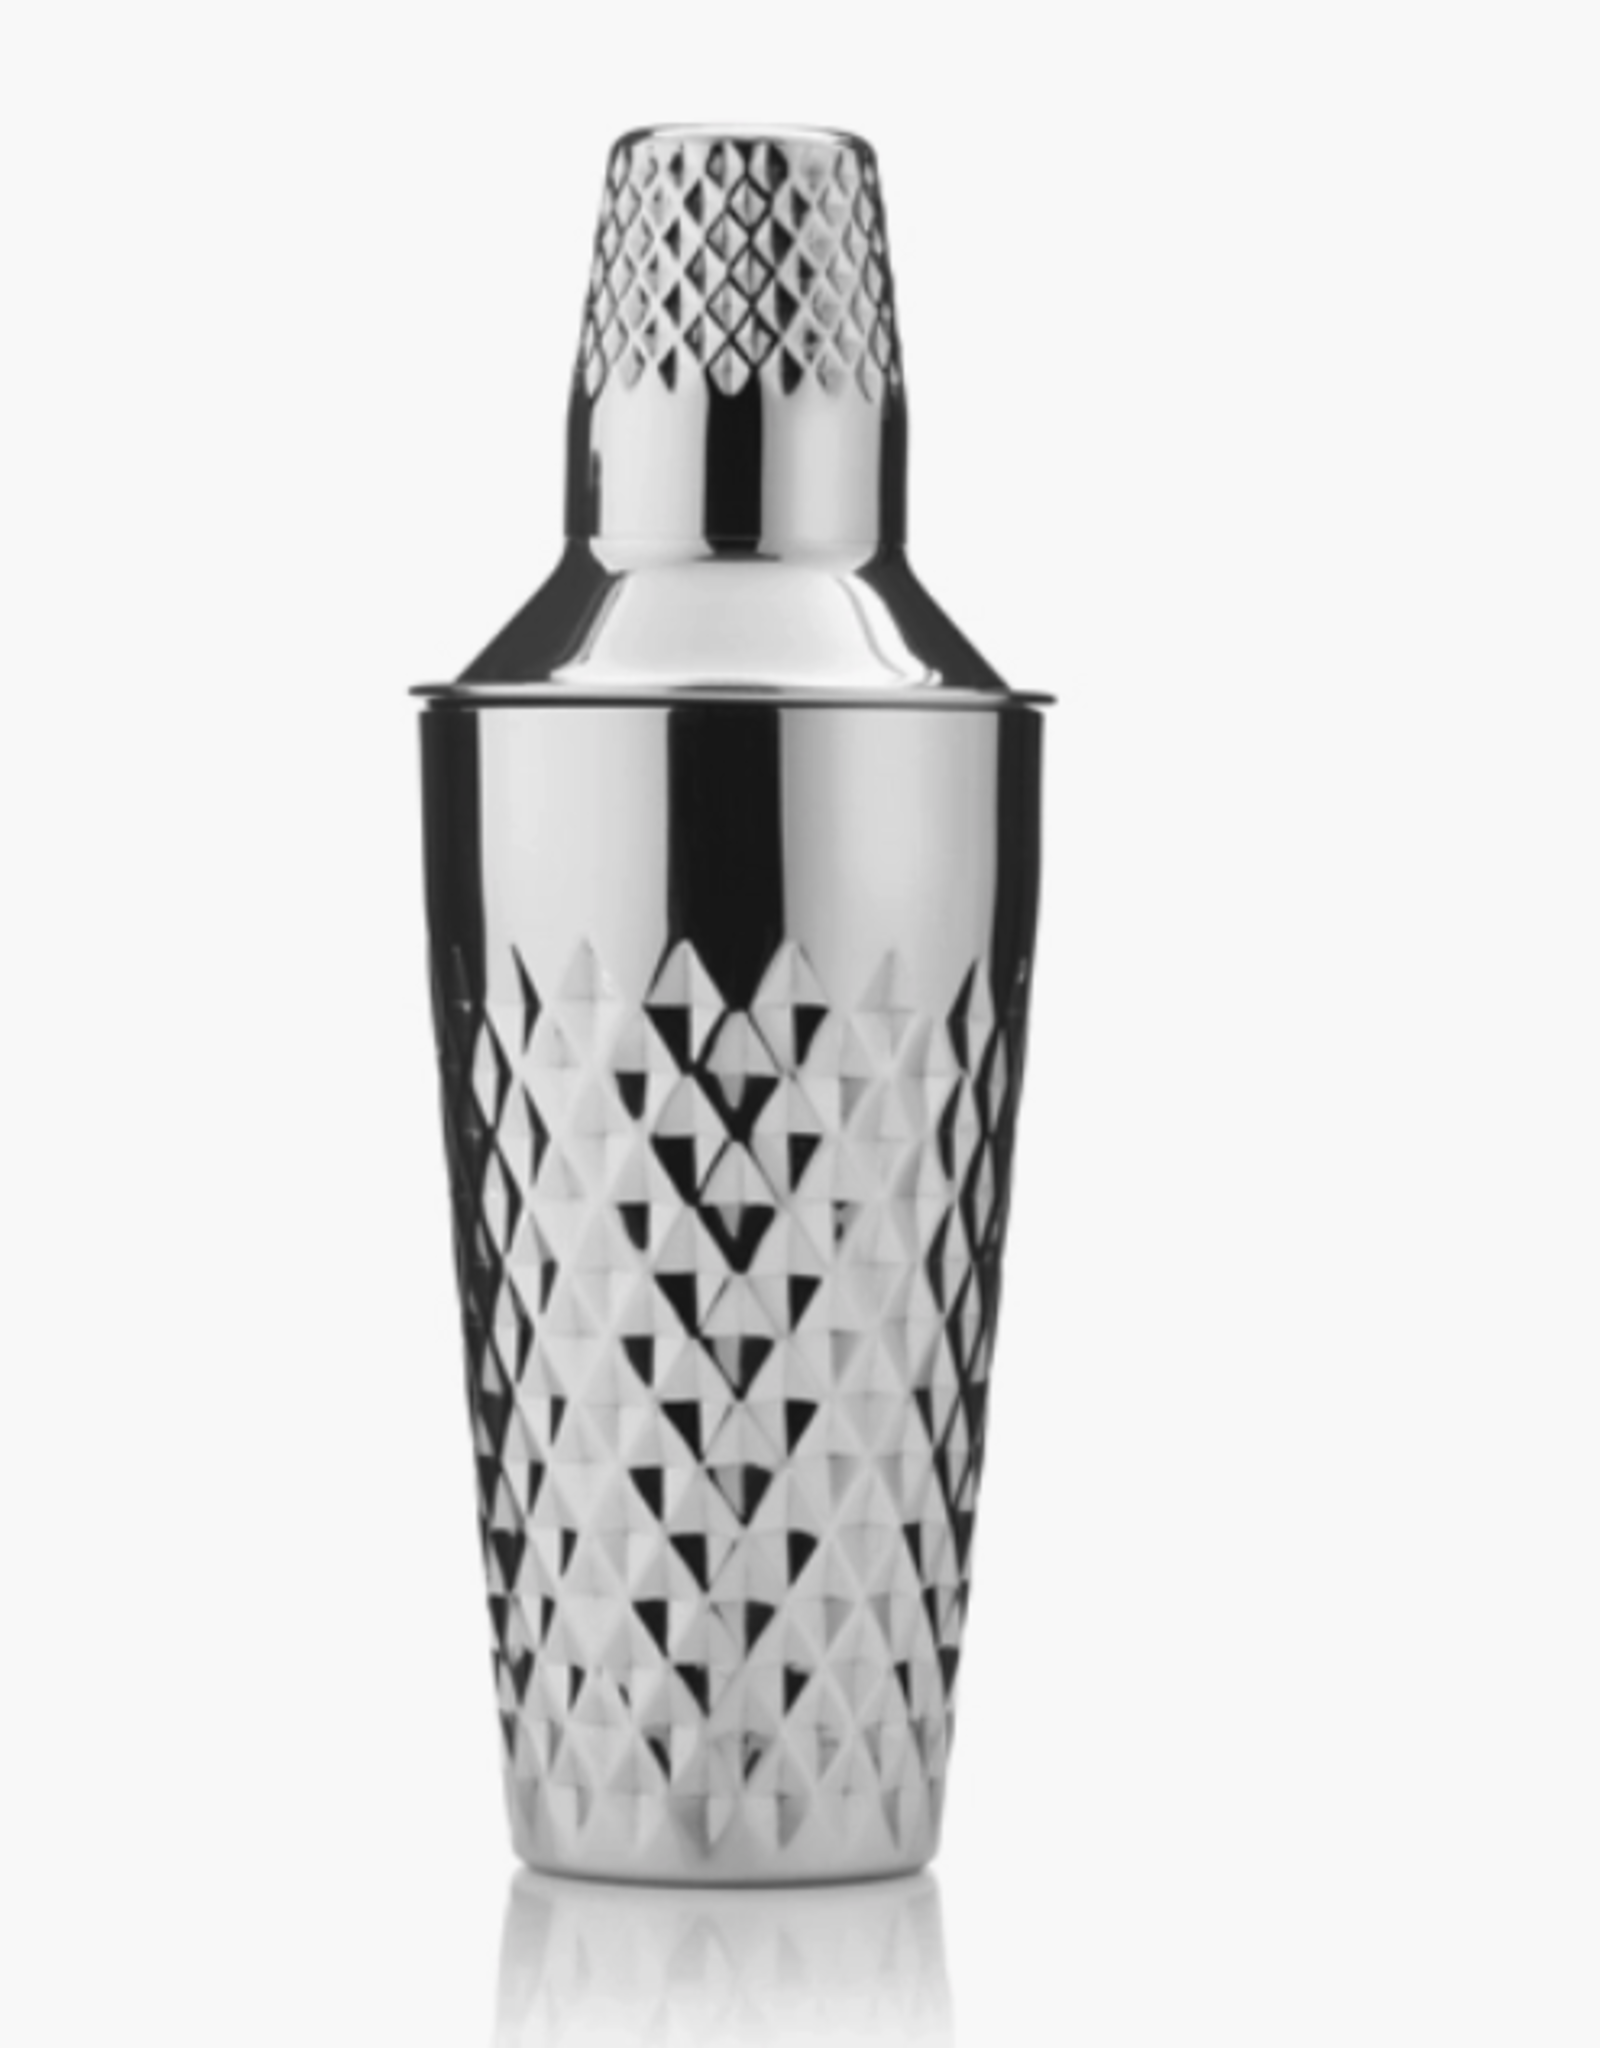 Irving Diamond Faceted Cocktail Shaker 25oz.